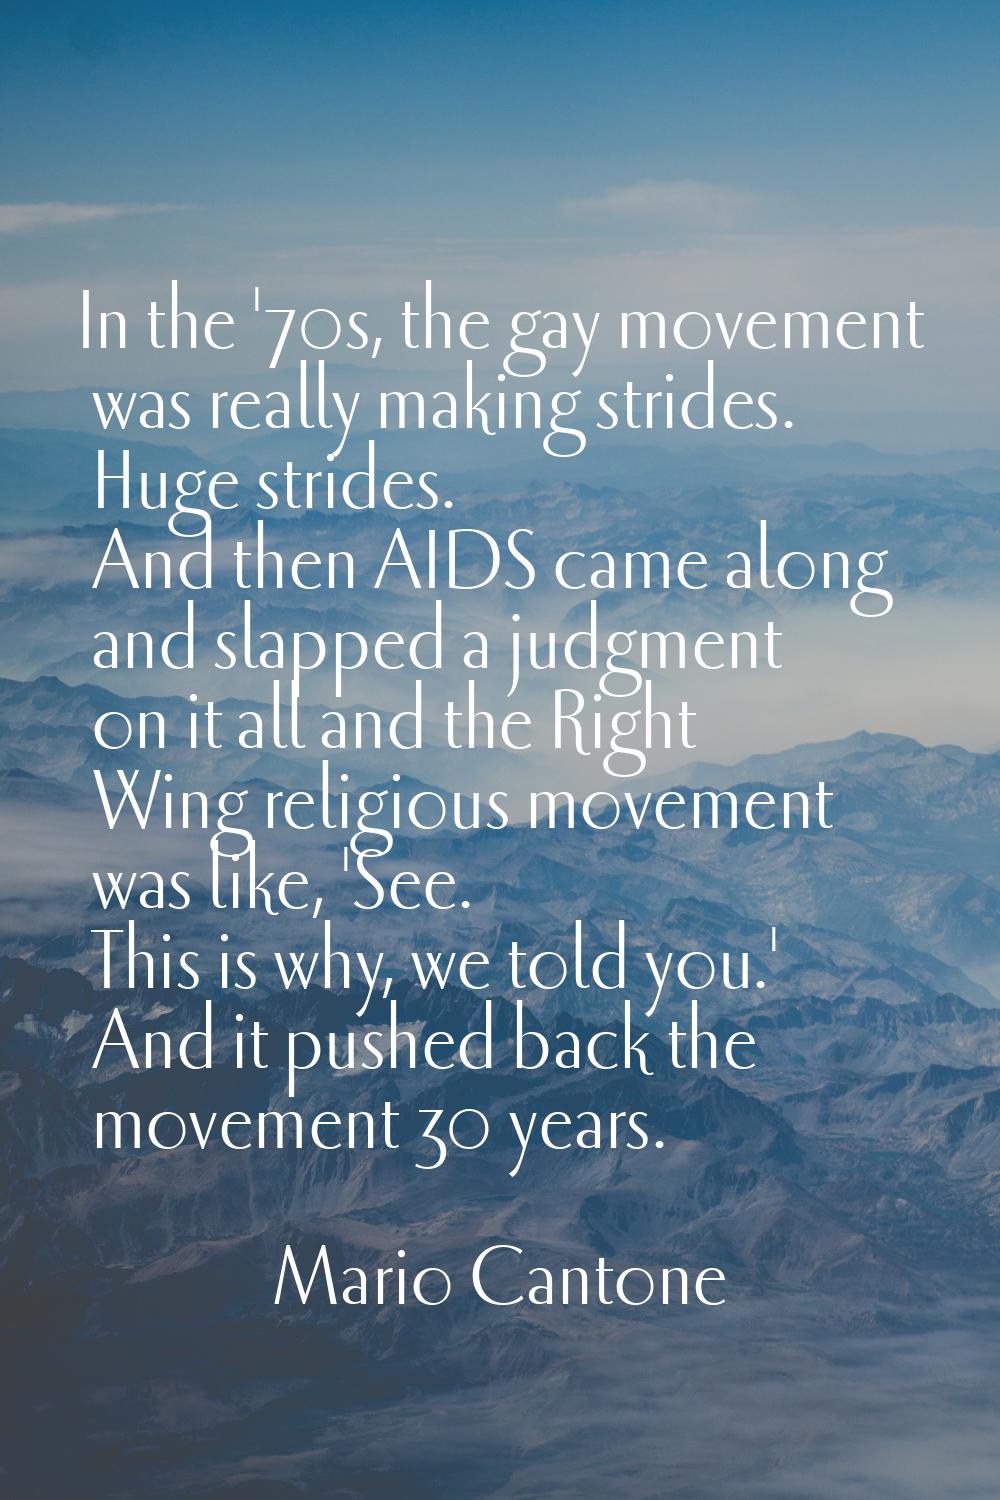 In the '70s, the gay movement was really making strides. Huge strides. And then AIDS came along and